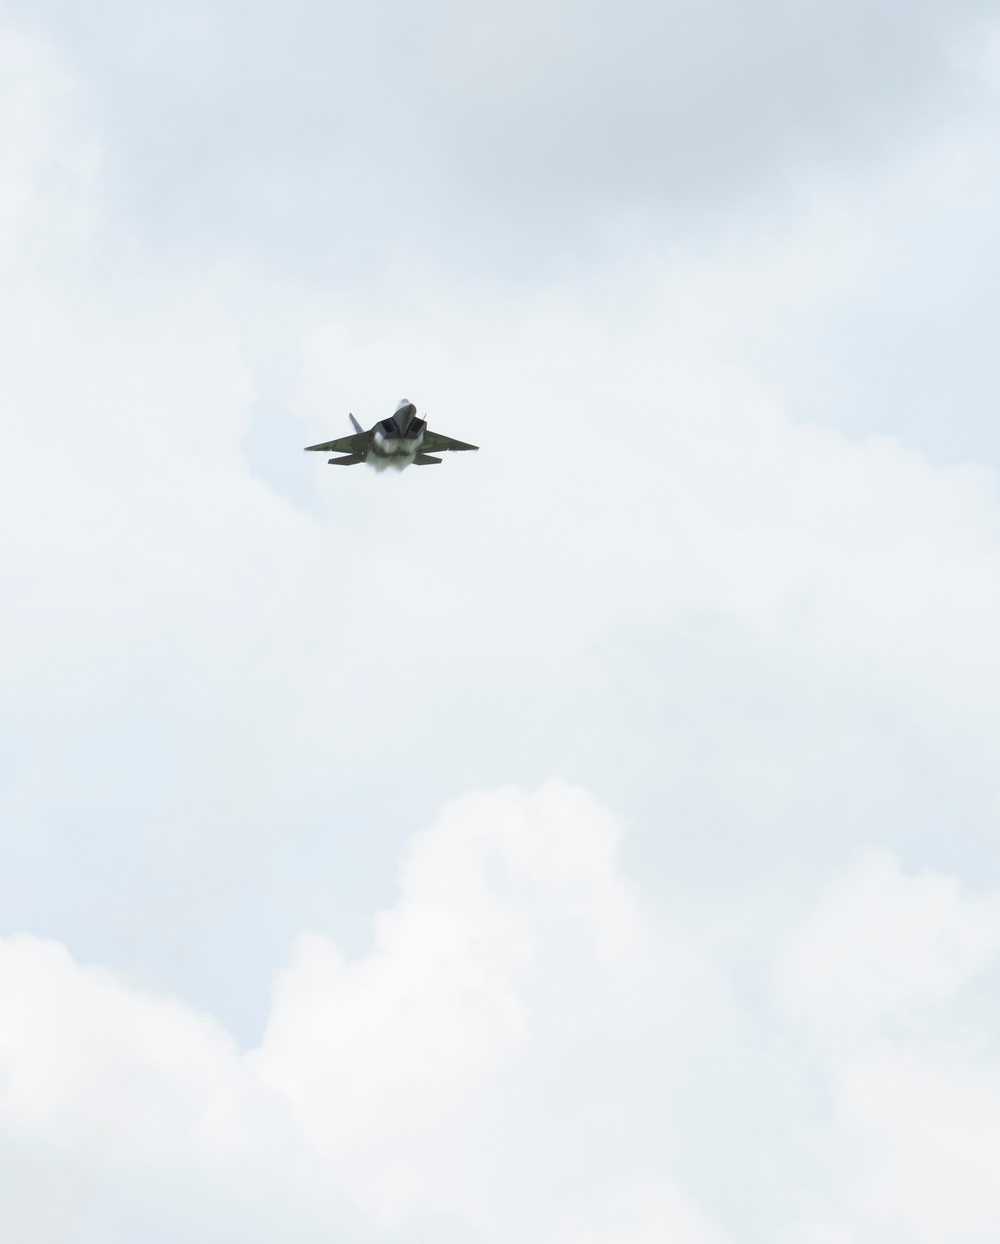 F-22 Raptor tears through the air space over Whiteman AFB during 2019 Wings Over Whiteman Air and Space Show